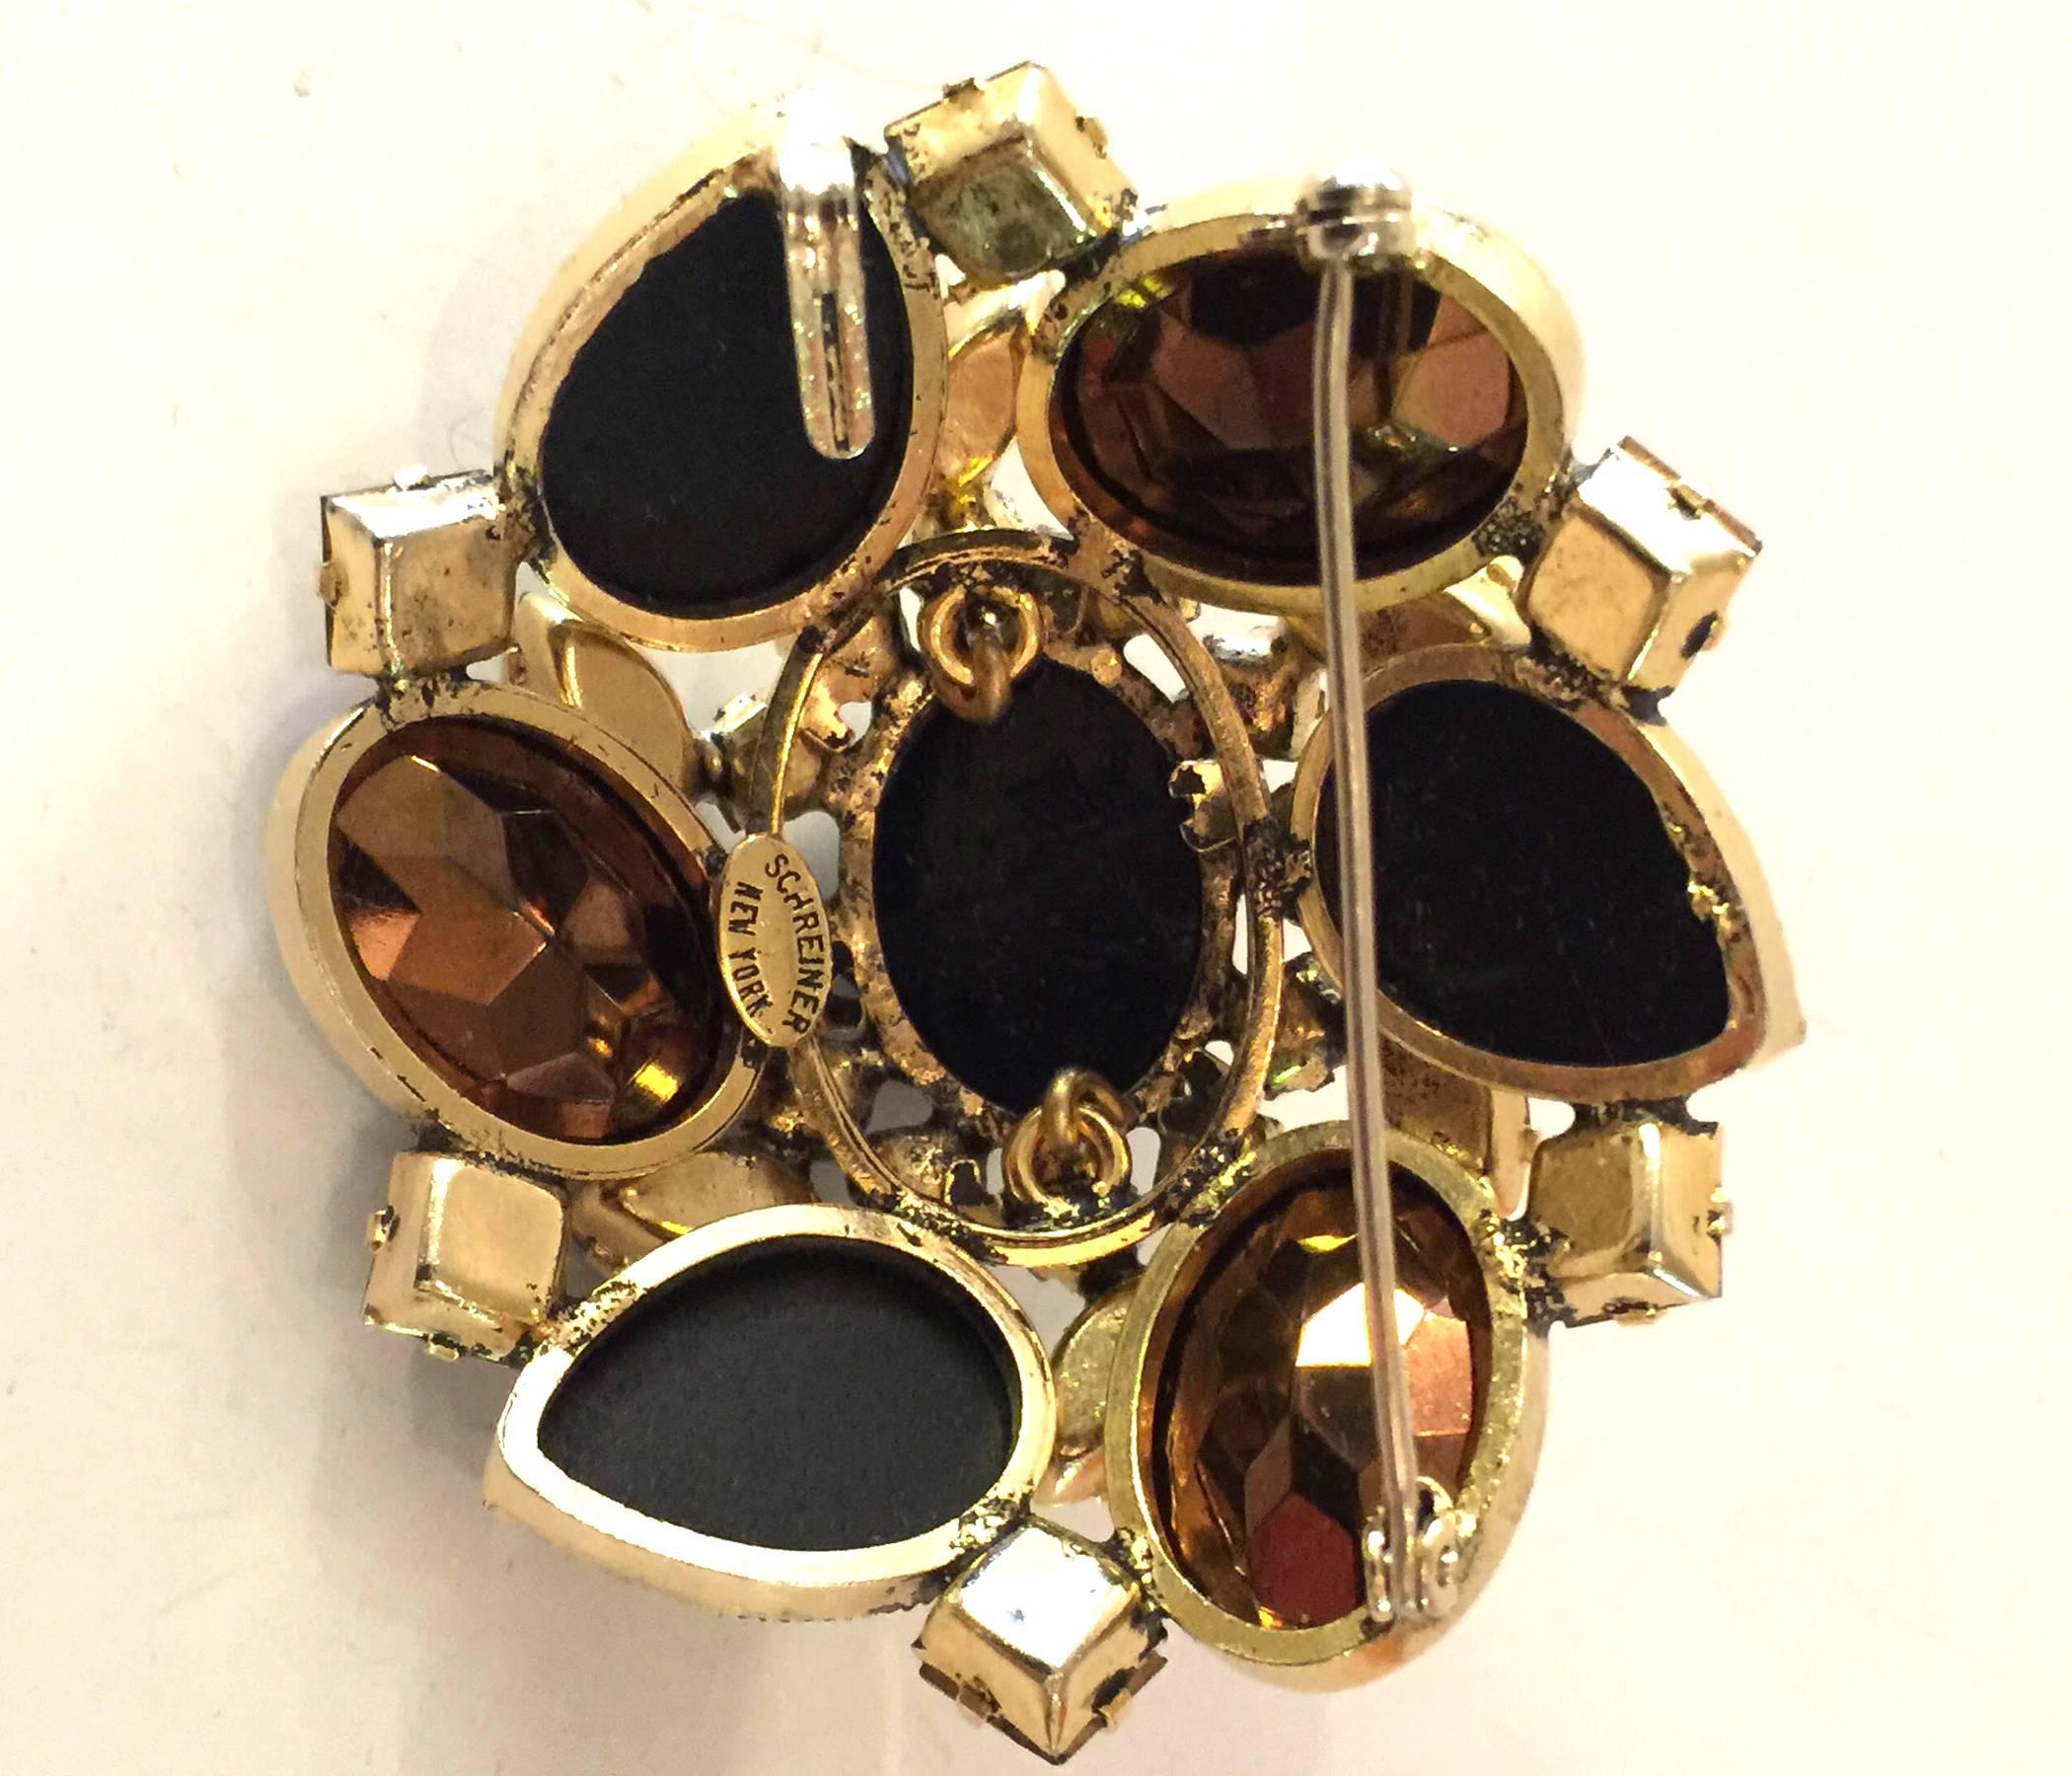 This classic Schreiner New York dome shaped brooch pin pendant is utterly reflective of this makers iconic oeuvre. Known for domed pins and hardware construction utilizing inner oval rings and o ring connectors to build up the height of the pin